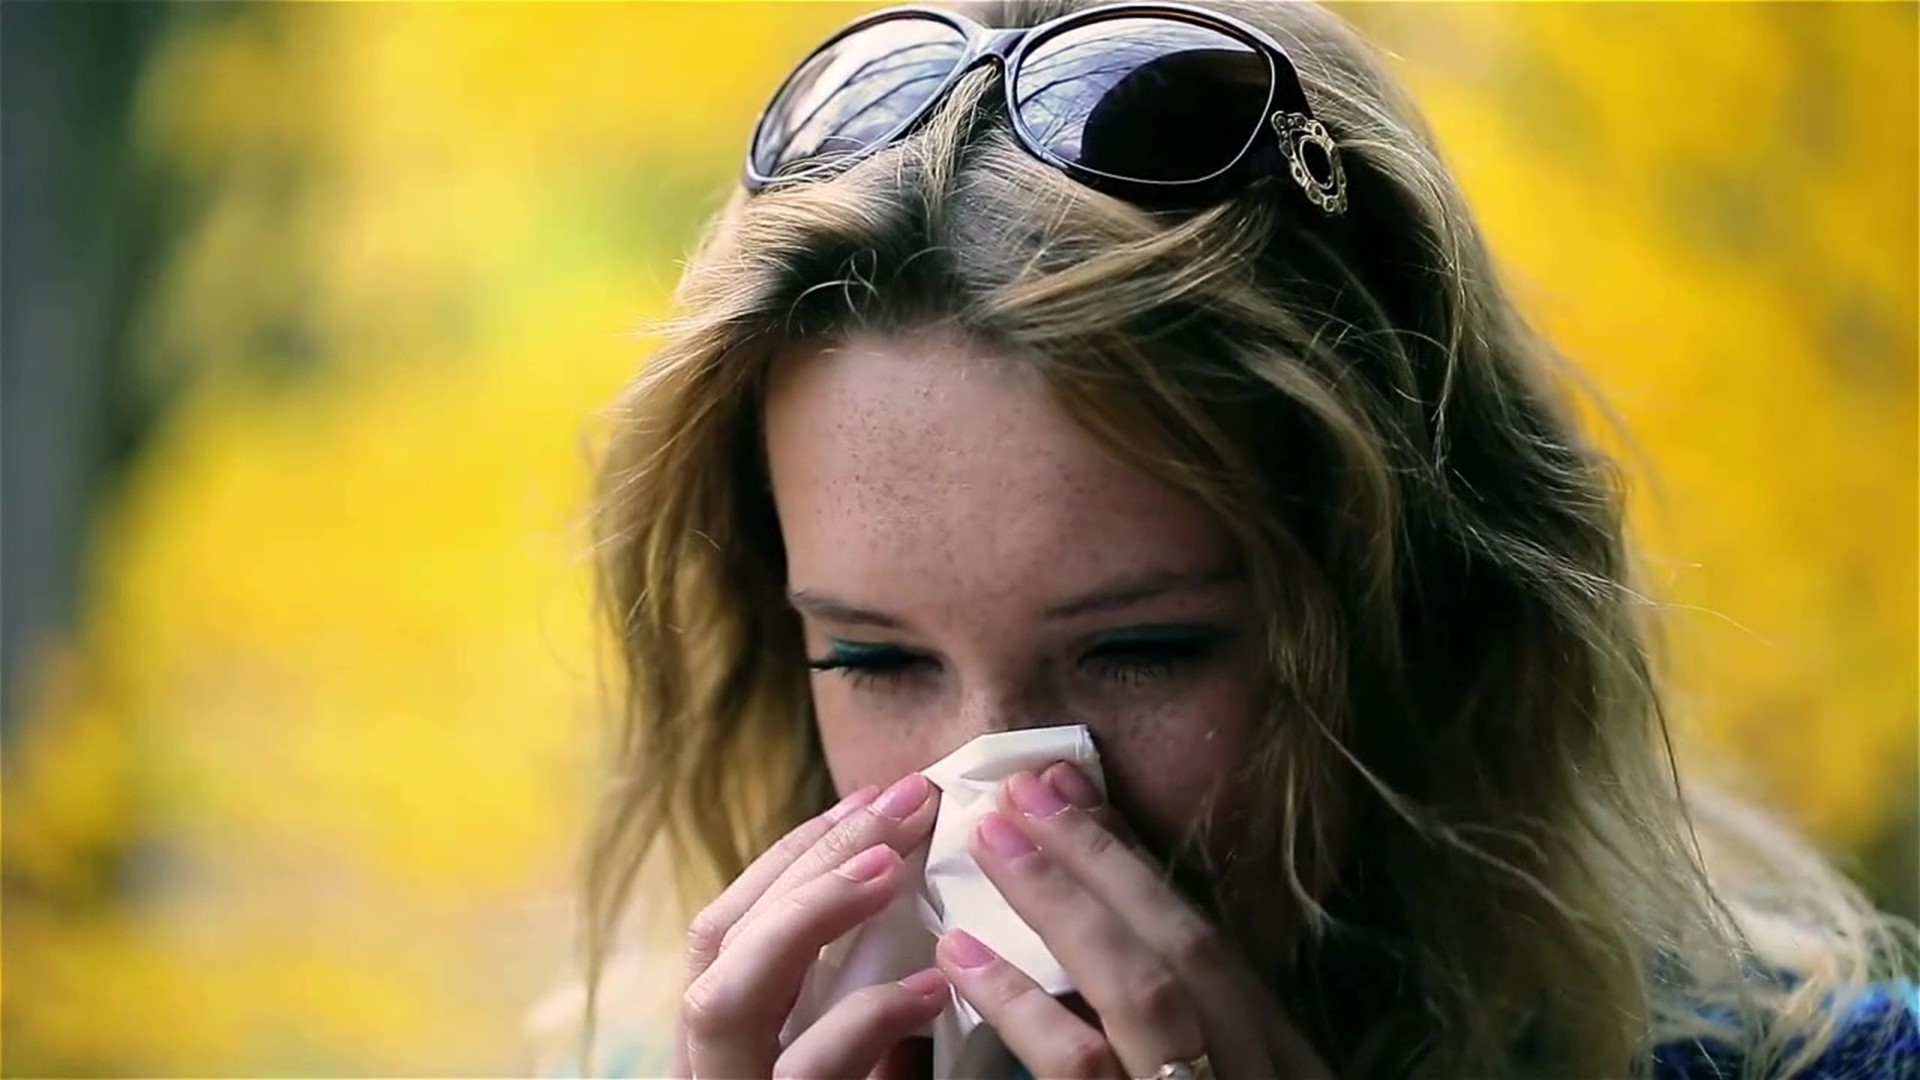 Unseasonably warm temperatures could bring an earlier and longer allergy season.